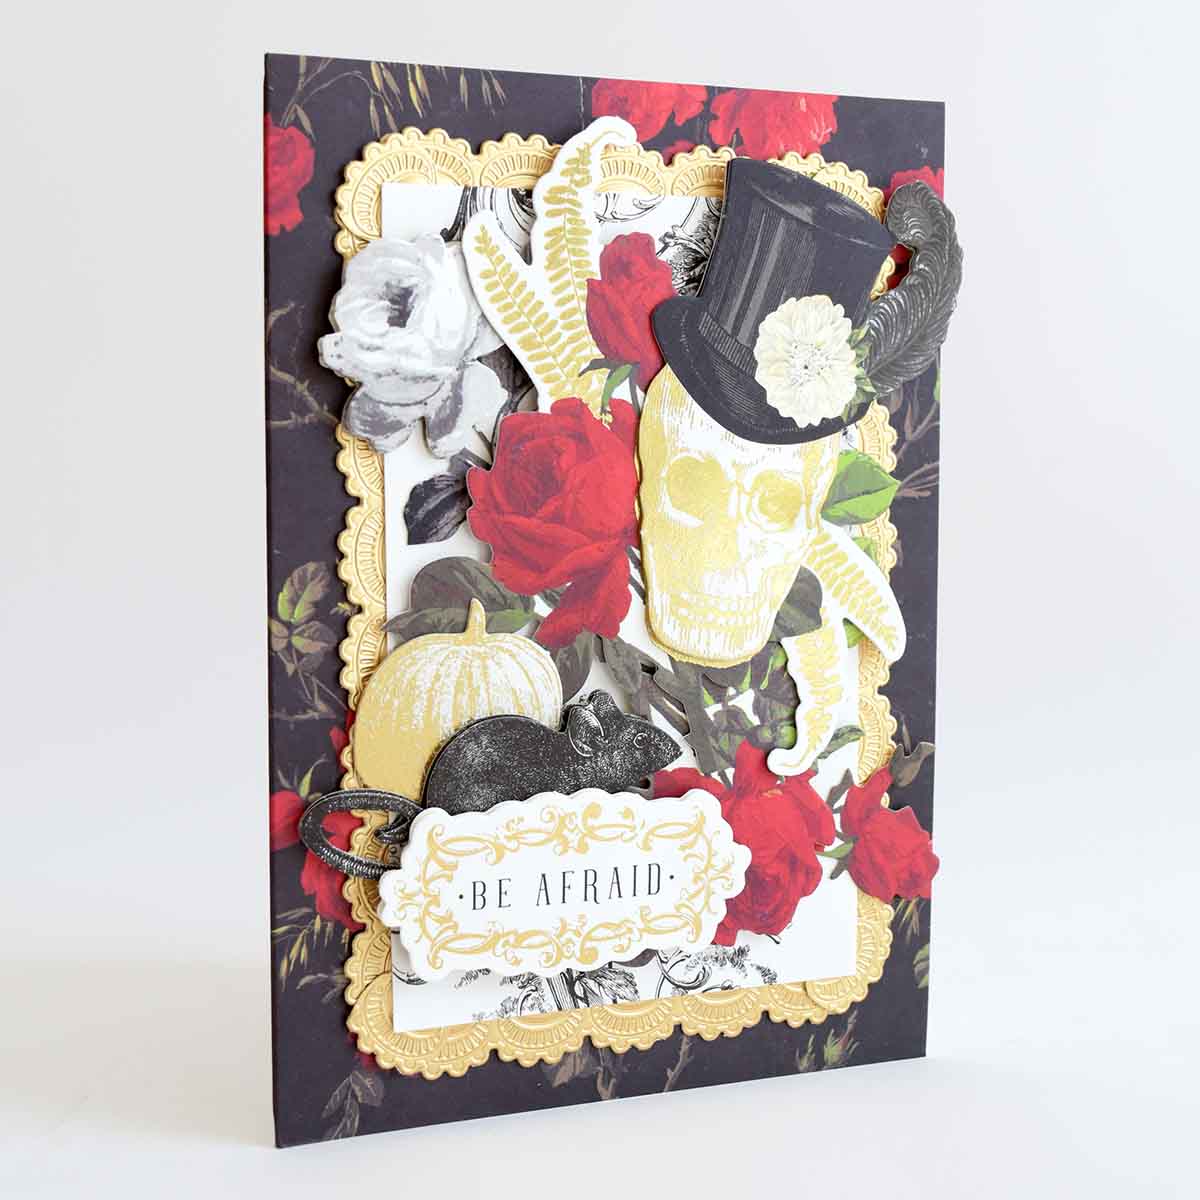 a card with a skull and roses on it.